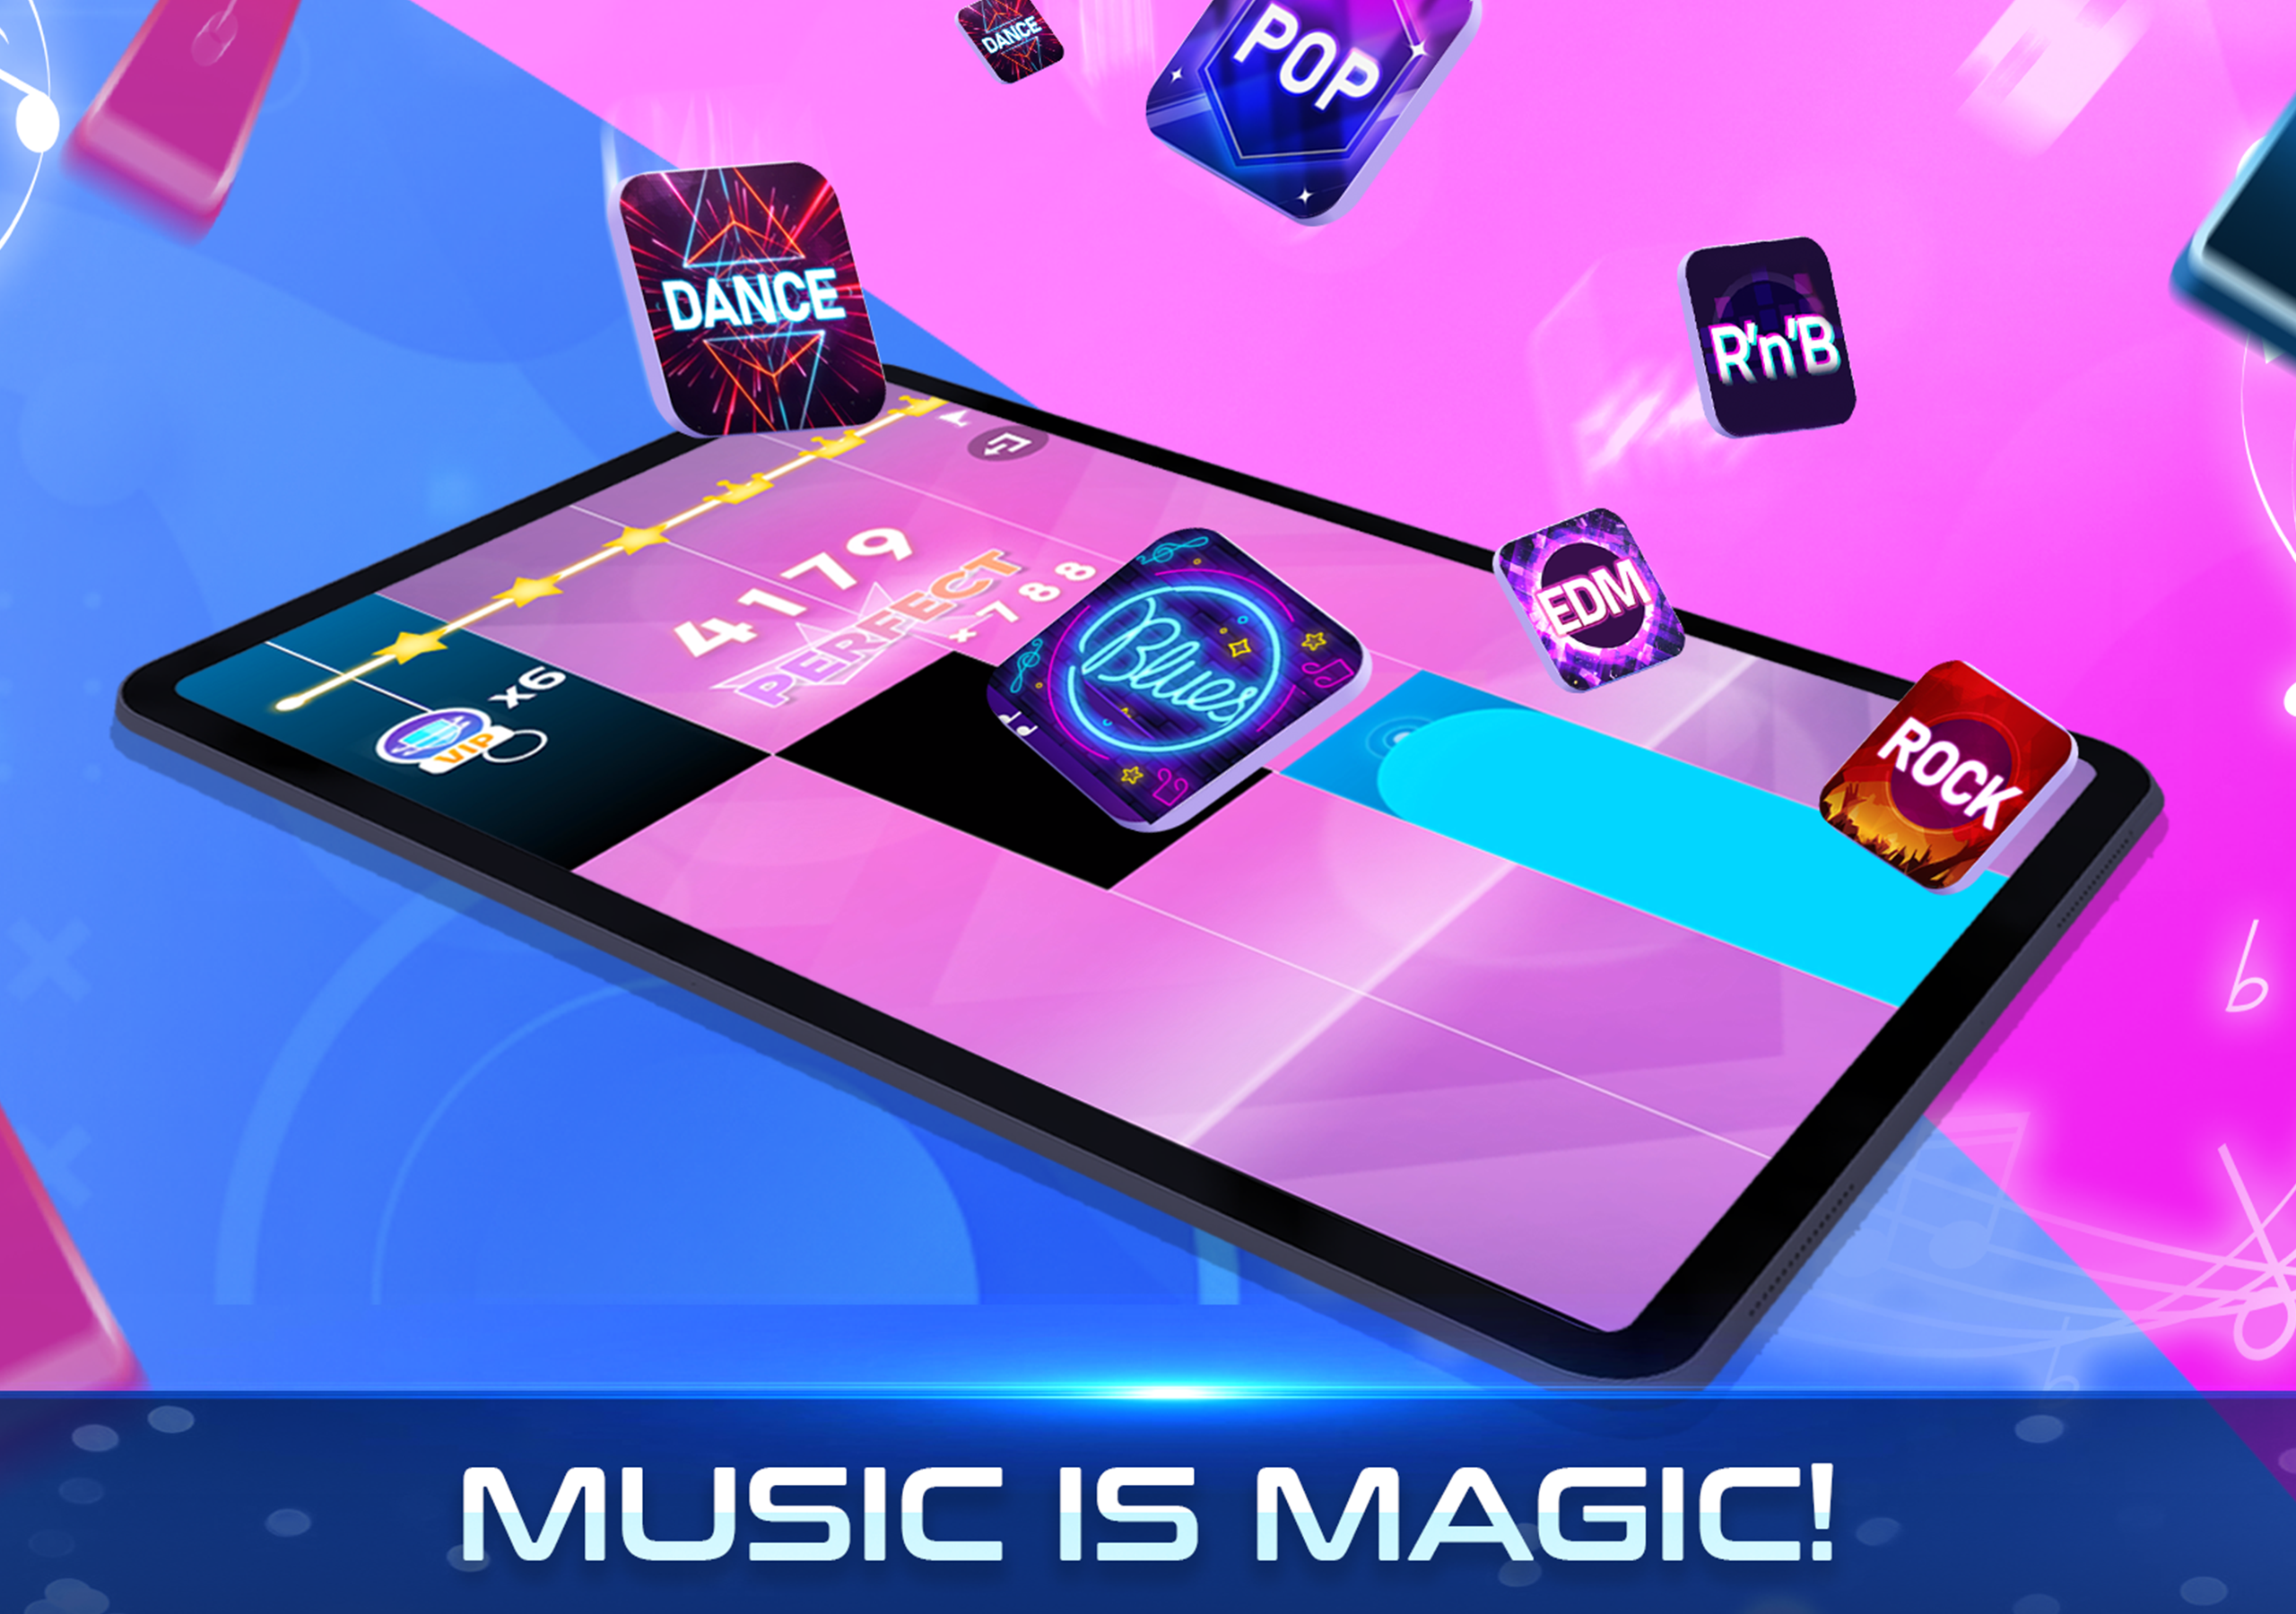 Magic Tiles 3 APK for Android - Download